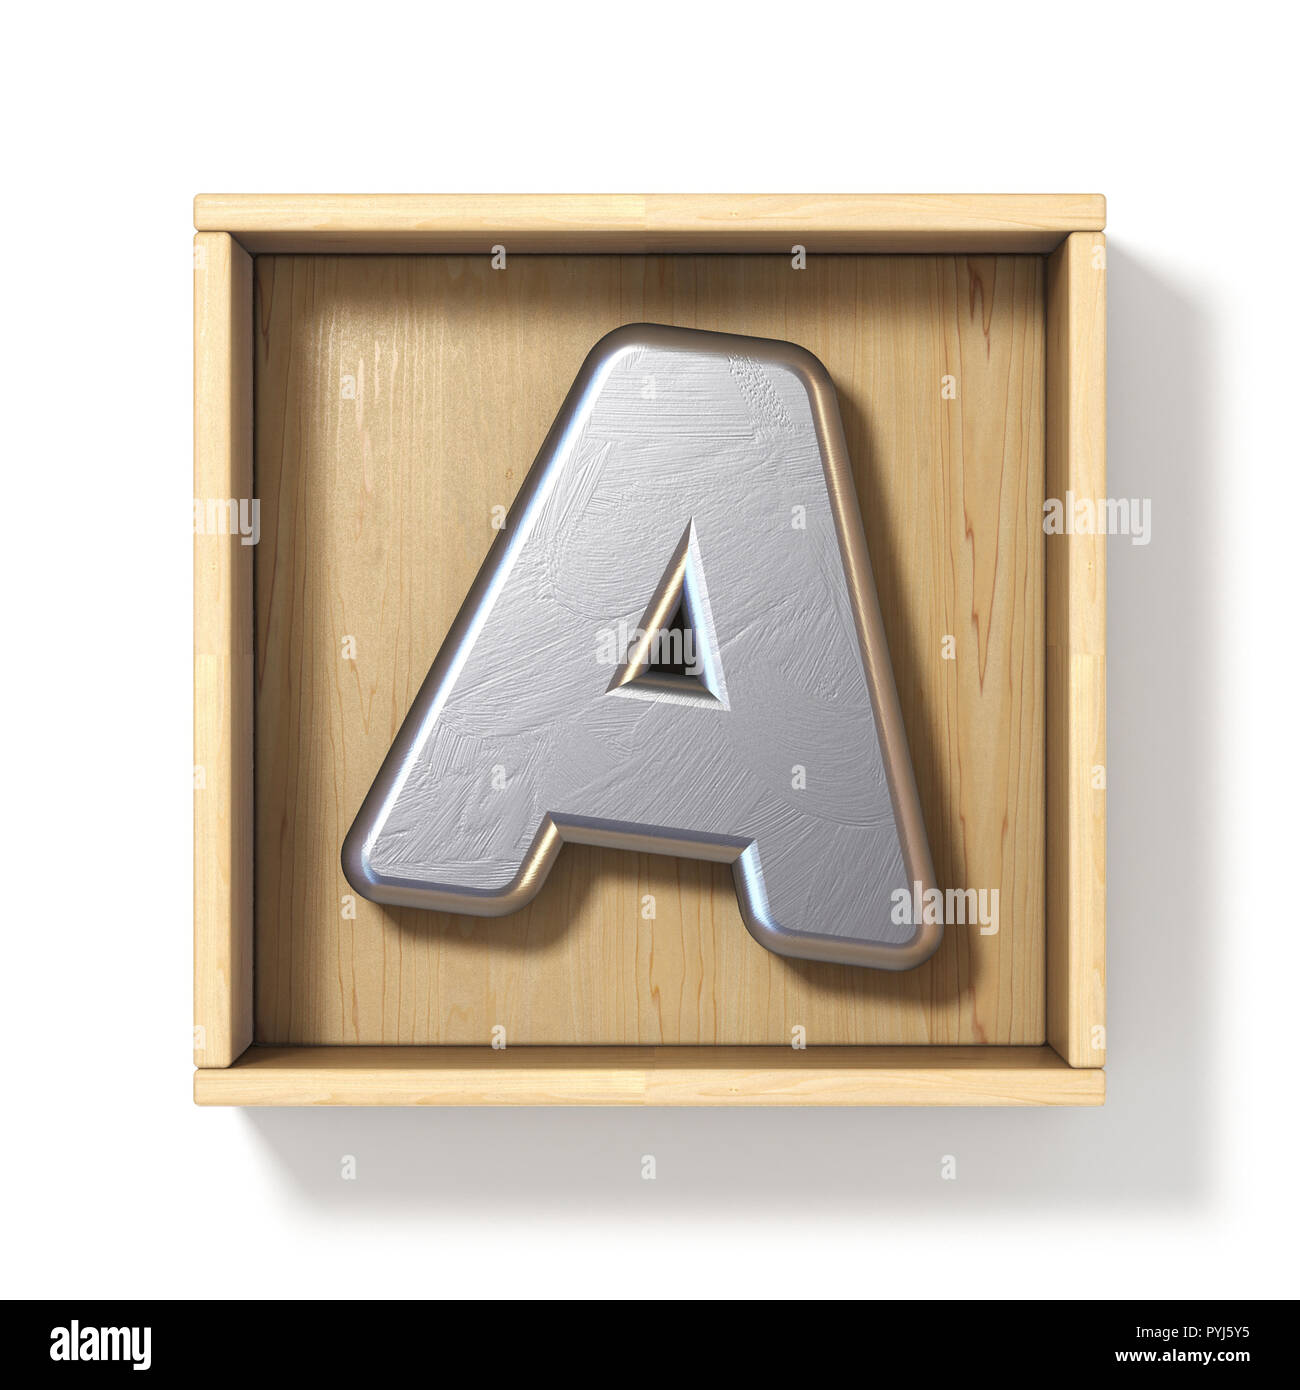 Silver metal letter A in wooden box 3D render illustration isolated on white background Stock Photo